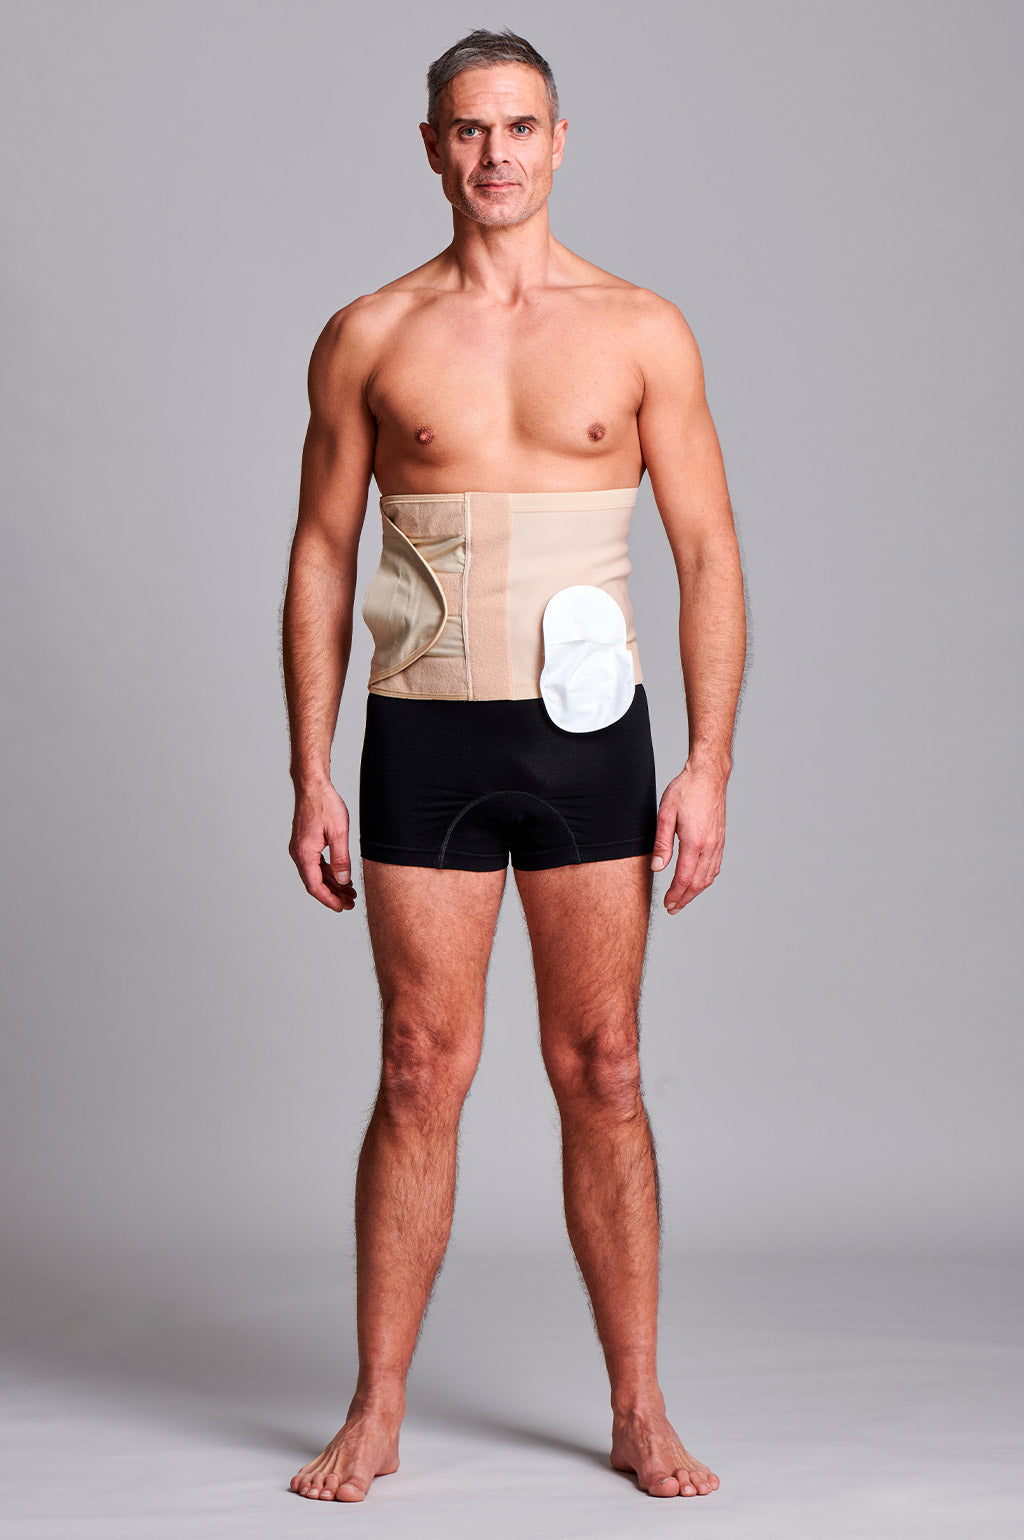 Mens Briefs with Pocket for Stoma / Ostomy Bag – Available in 4